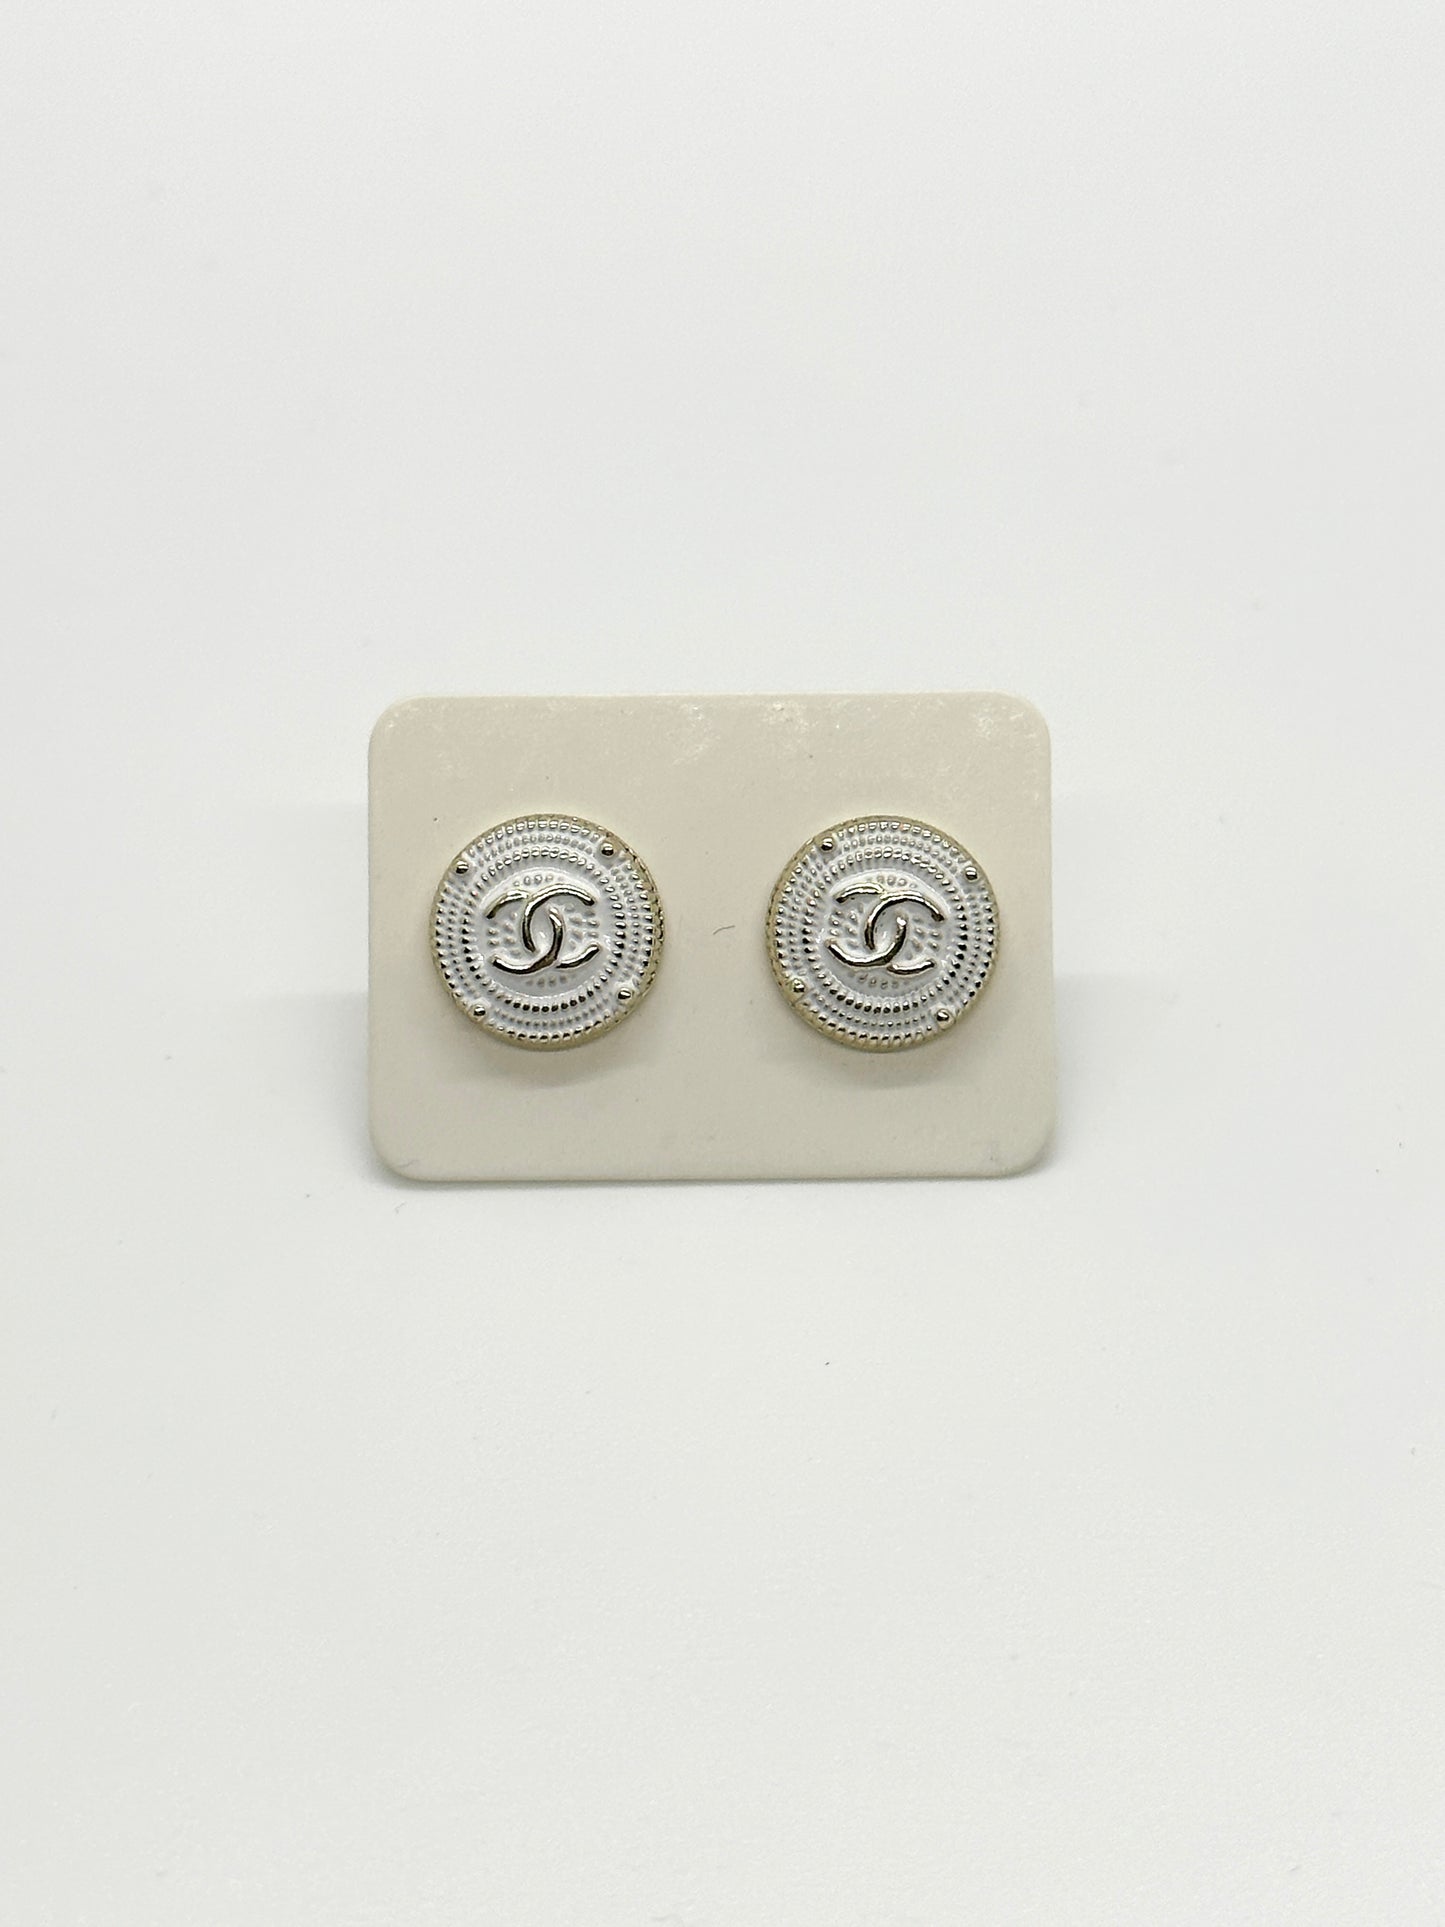 Authentic Chanel Buttons | Repurposed White and Gold Earring Set